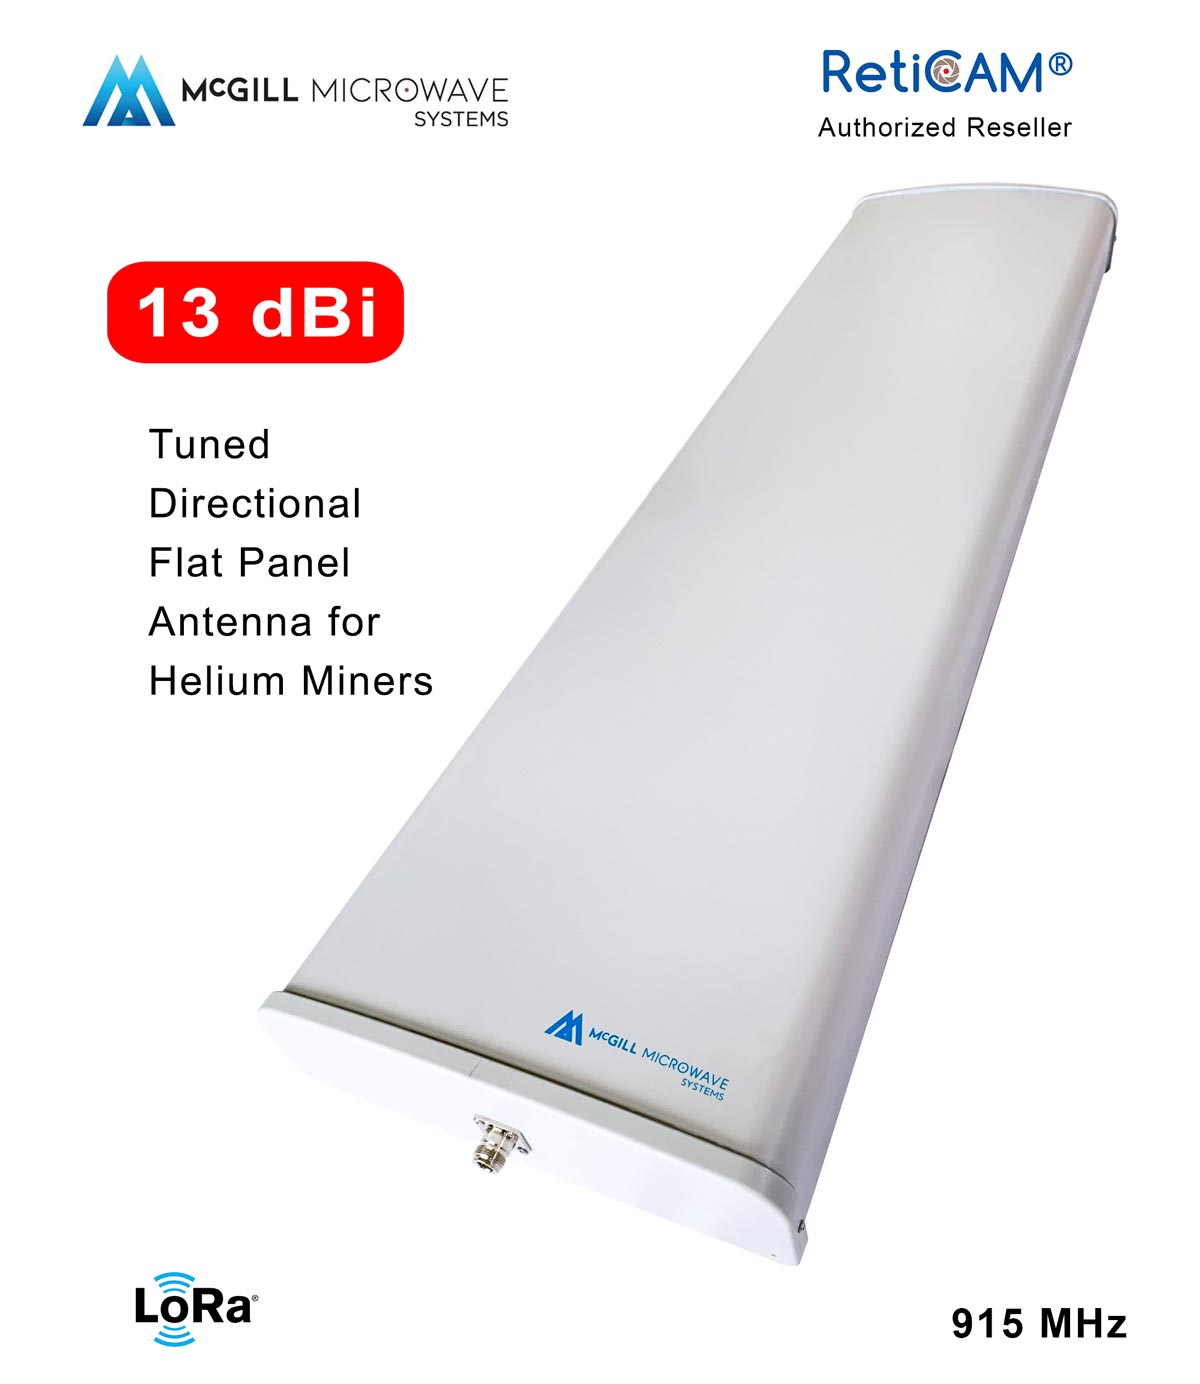 McGill Antenna 13dBi Flat Panel Directional Tuned 915MHz for Helium Hotspot Miners